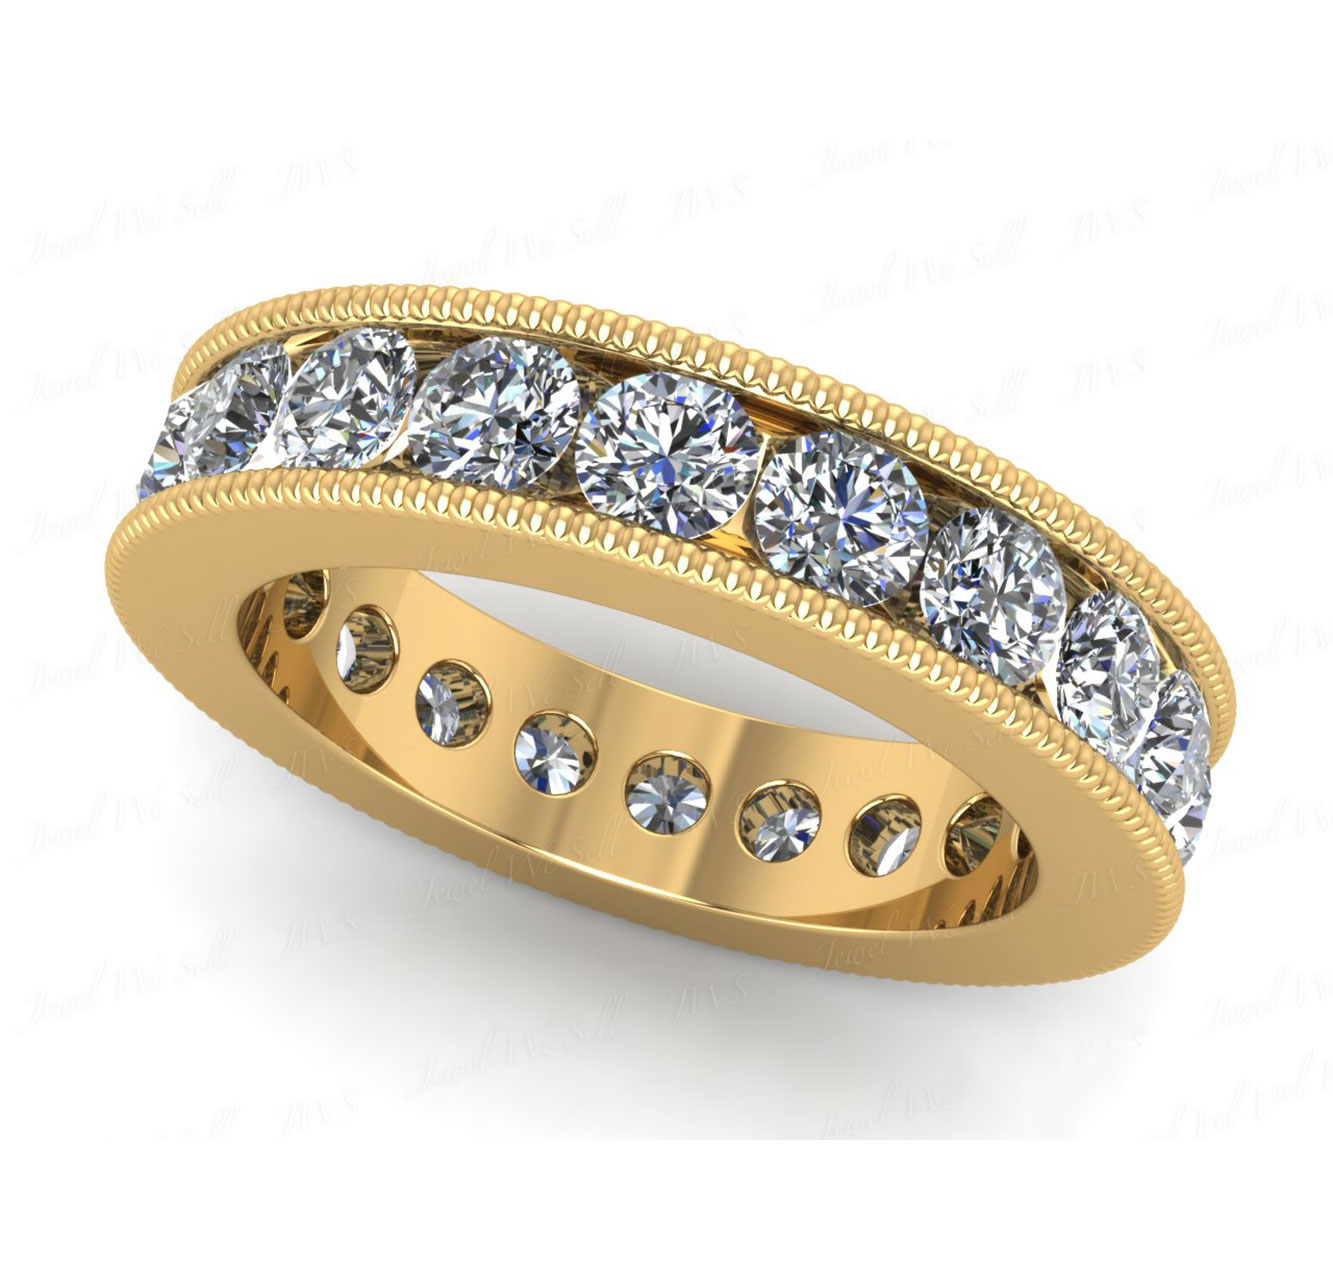 Jewel We Sell Natural 3.00Ct Round Cut Diamond Channel Set Milgrain Ladies Anniversary Wedding Eternity Band Ring Solid 10k Yellow Gold G-H I1